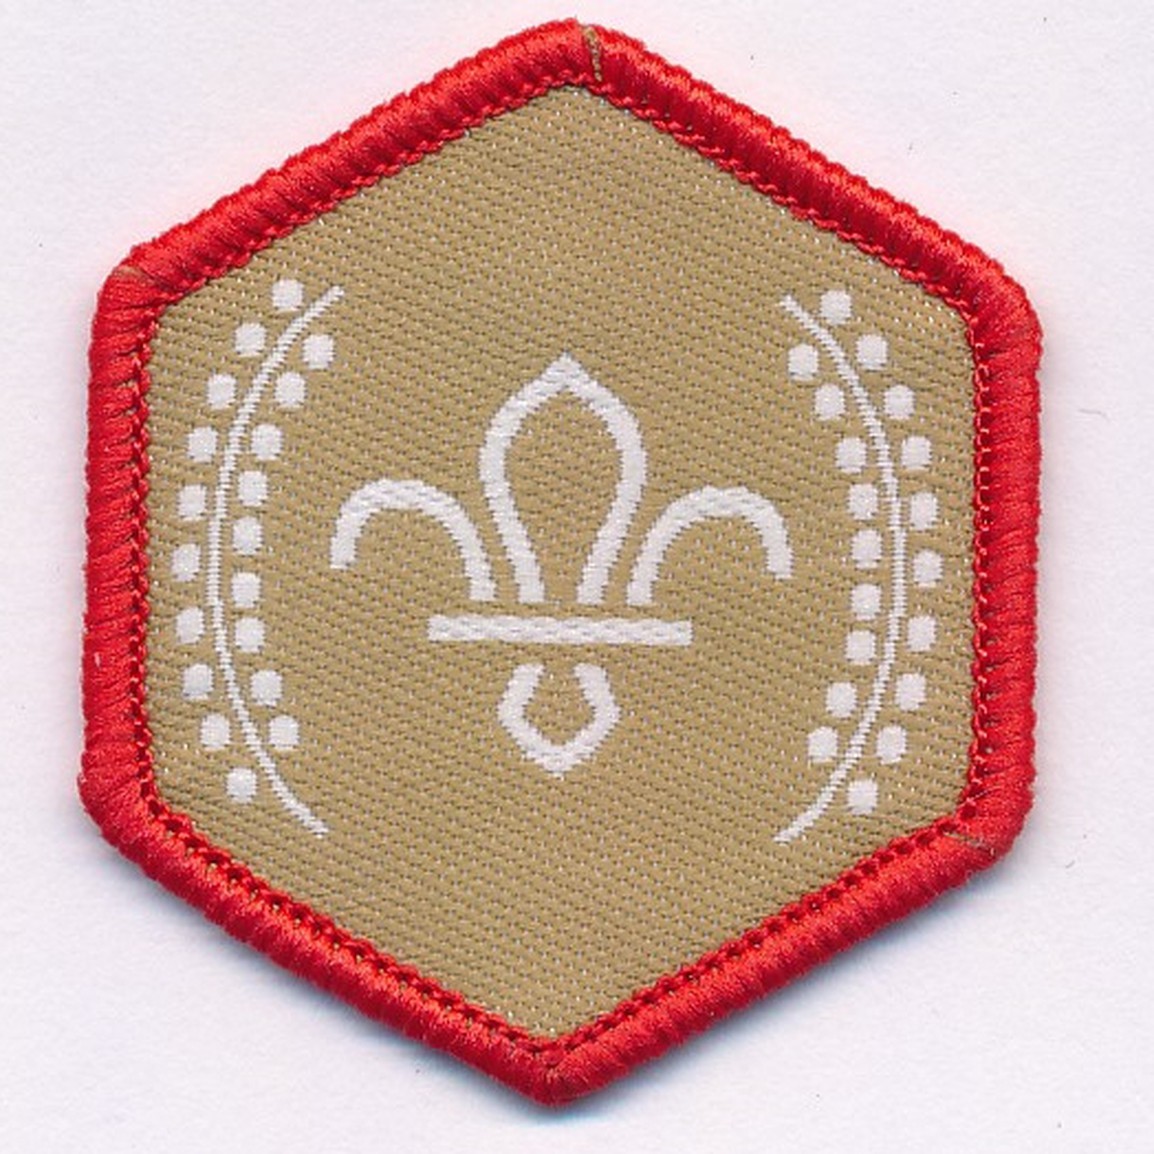 Badges – Scouts Chief Scout’s Gold Award